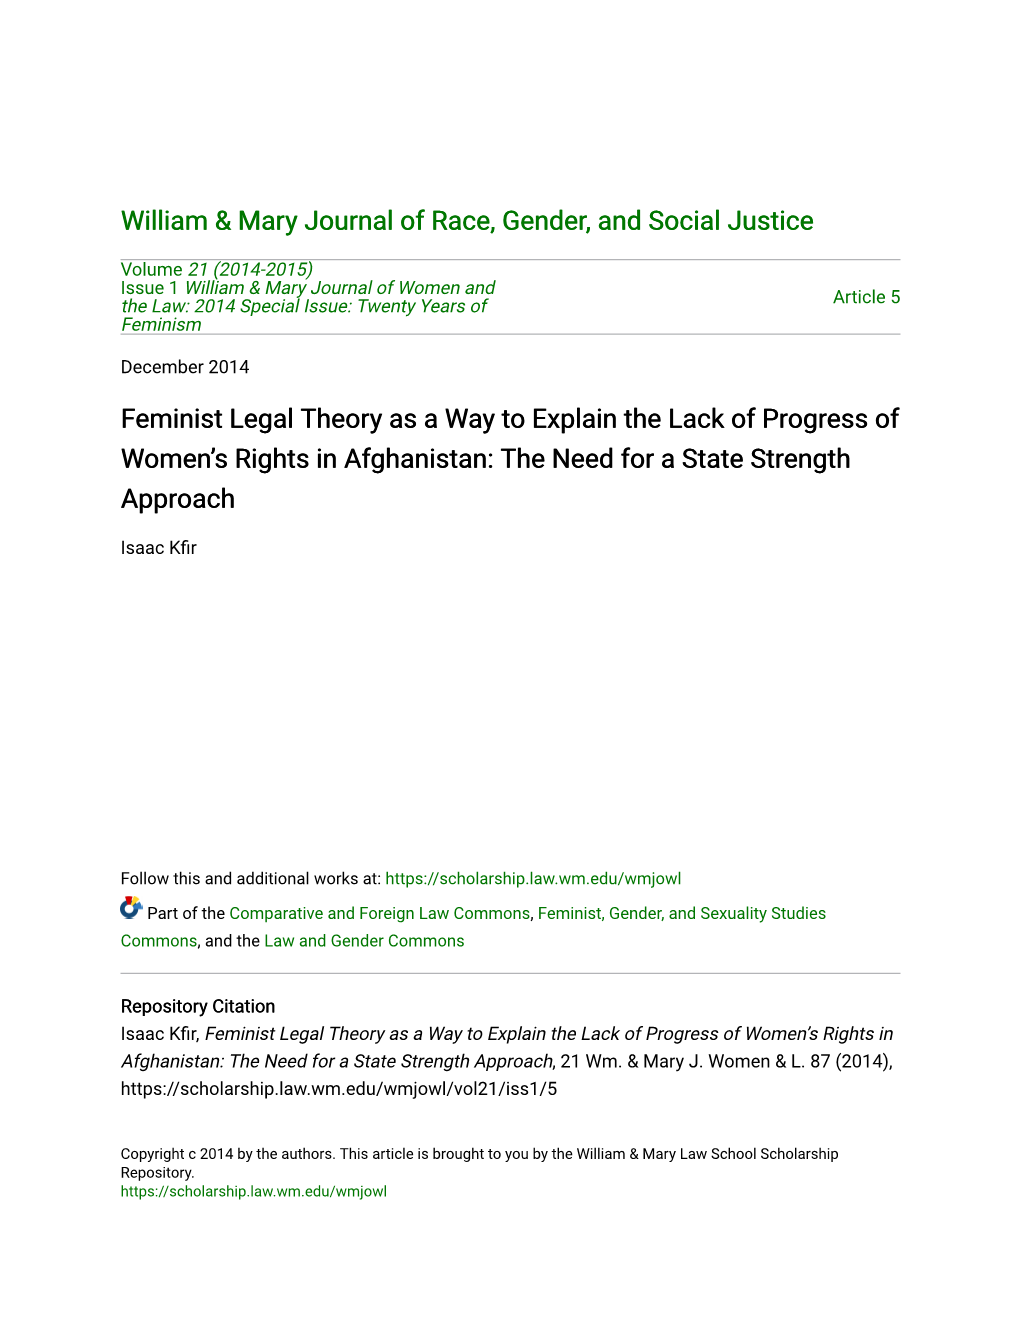 Feminist Legal Theory As a Way to Explain the Lack of Progress of Women’S Rights in Afghanistan: the Need for a State Strength Approach